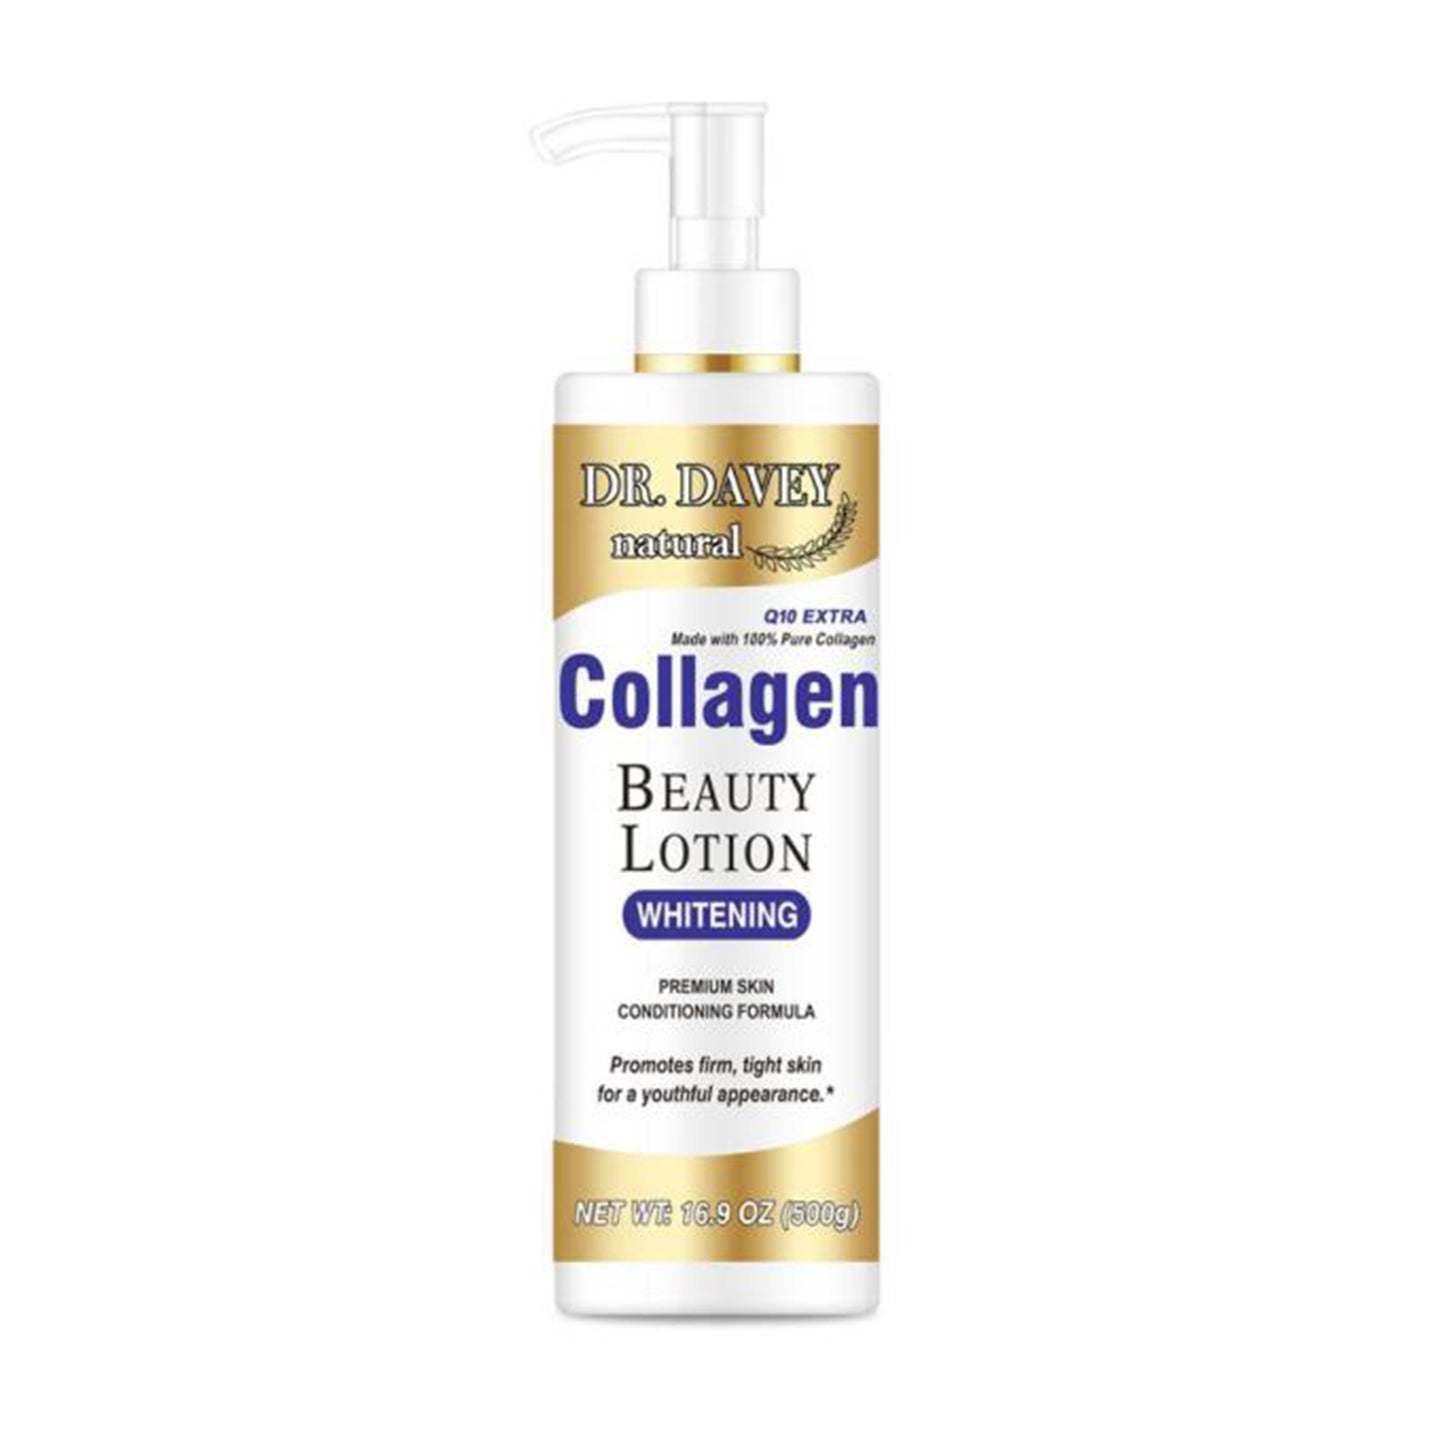 DR. DAVEY - COLLAGEN BEAUTY LOTION - 500G